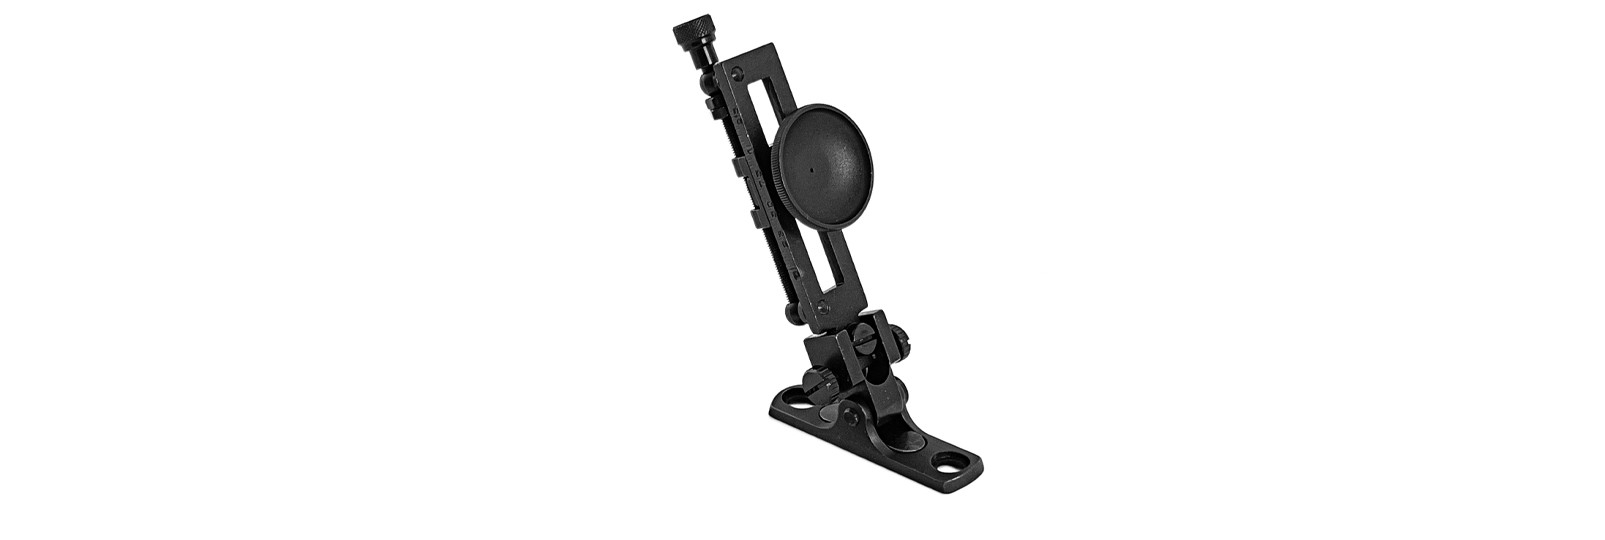 Short Creedmoor sight adjustable for windage and...